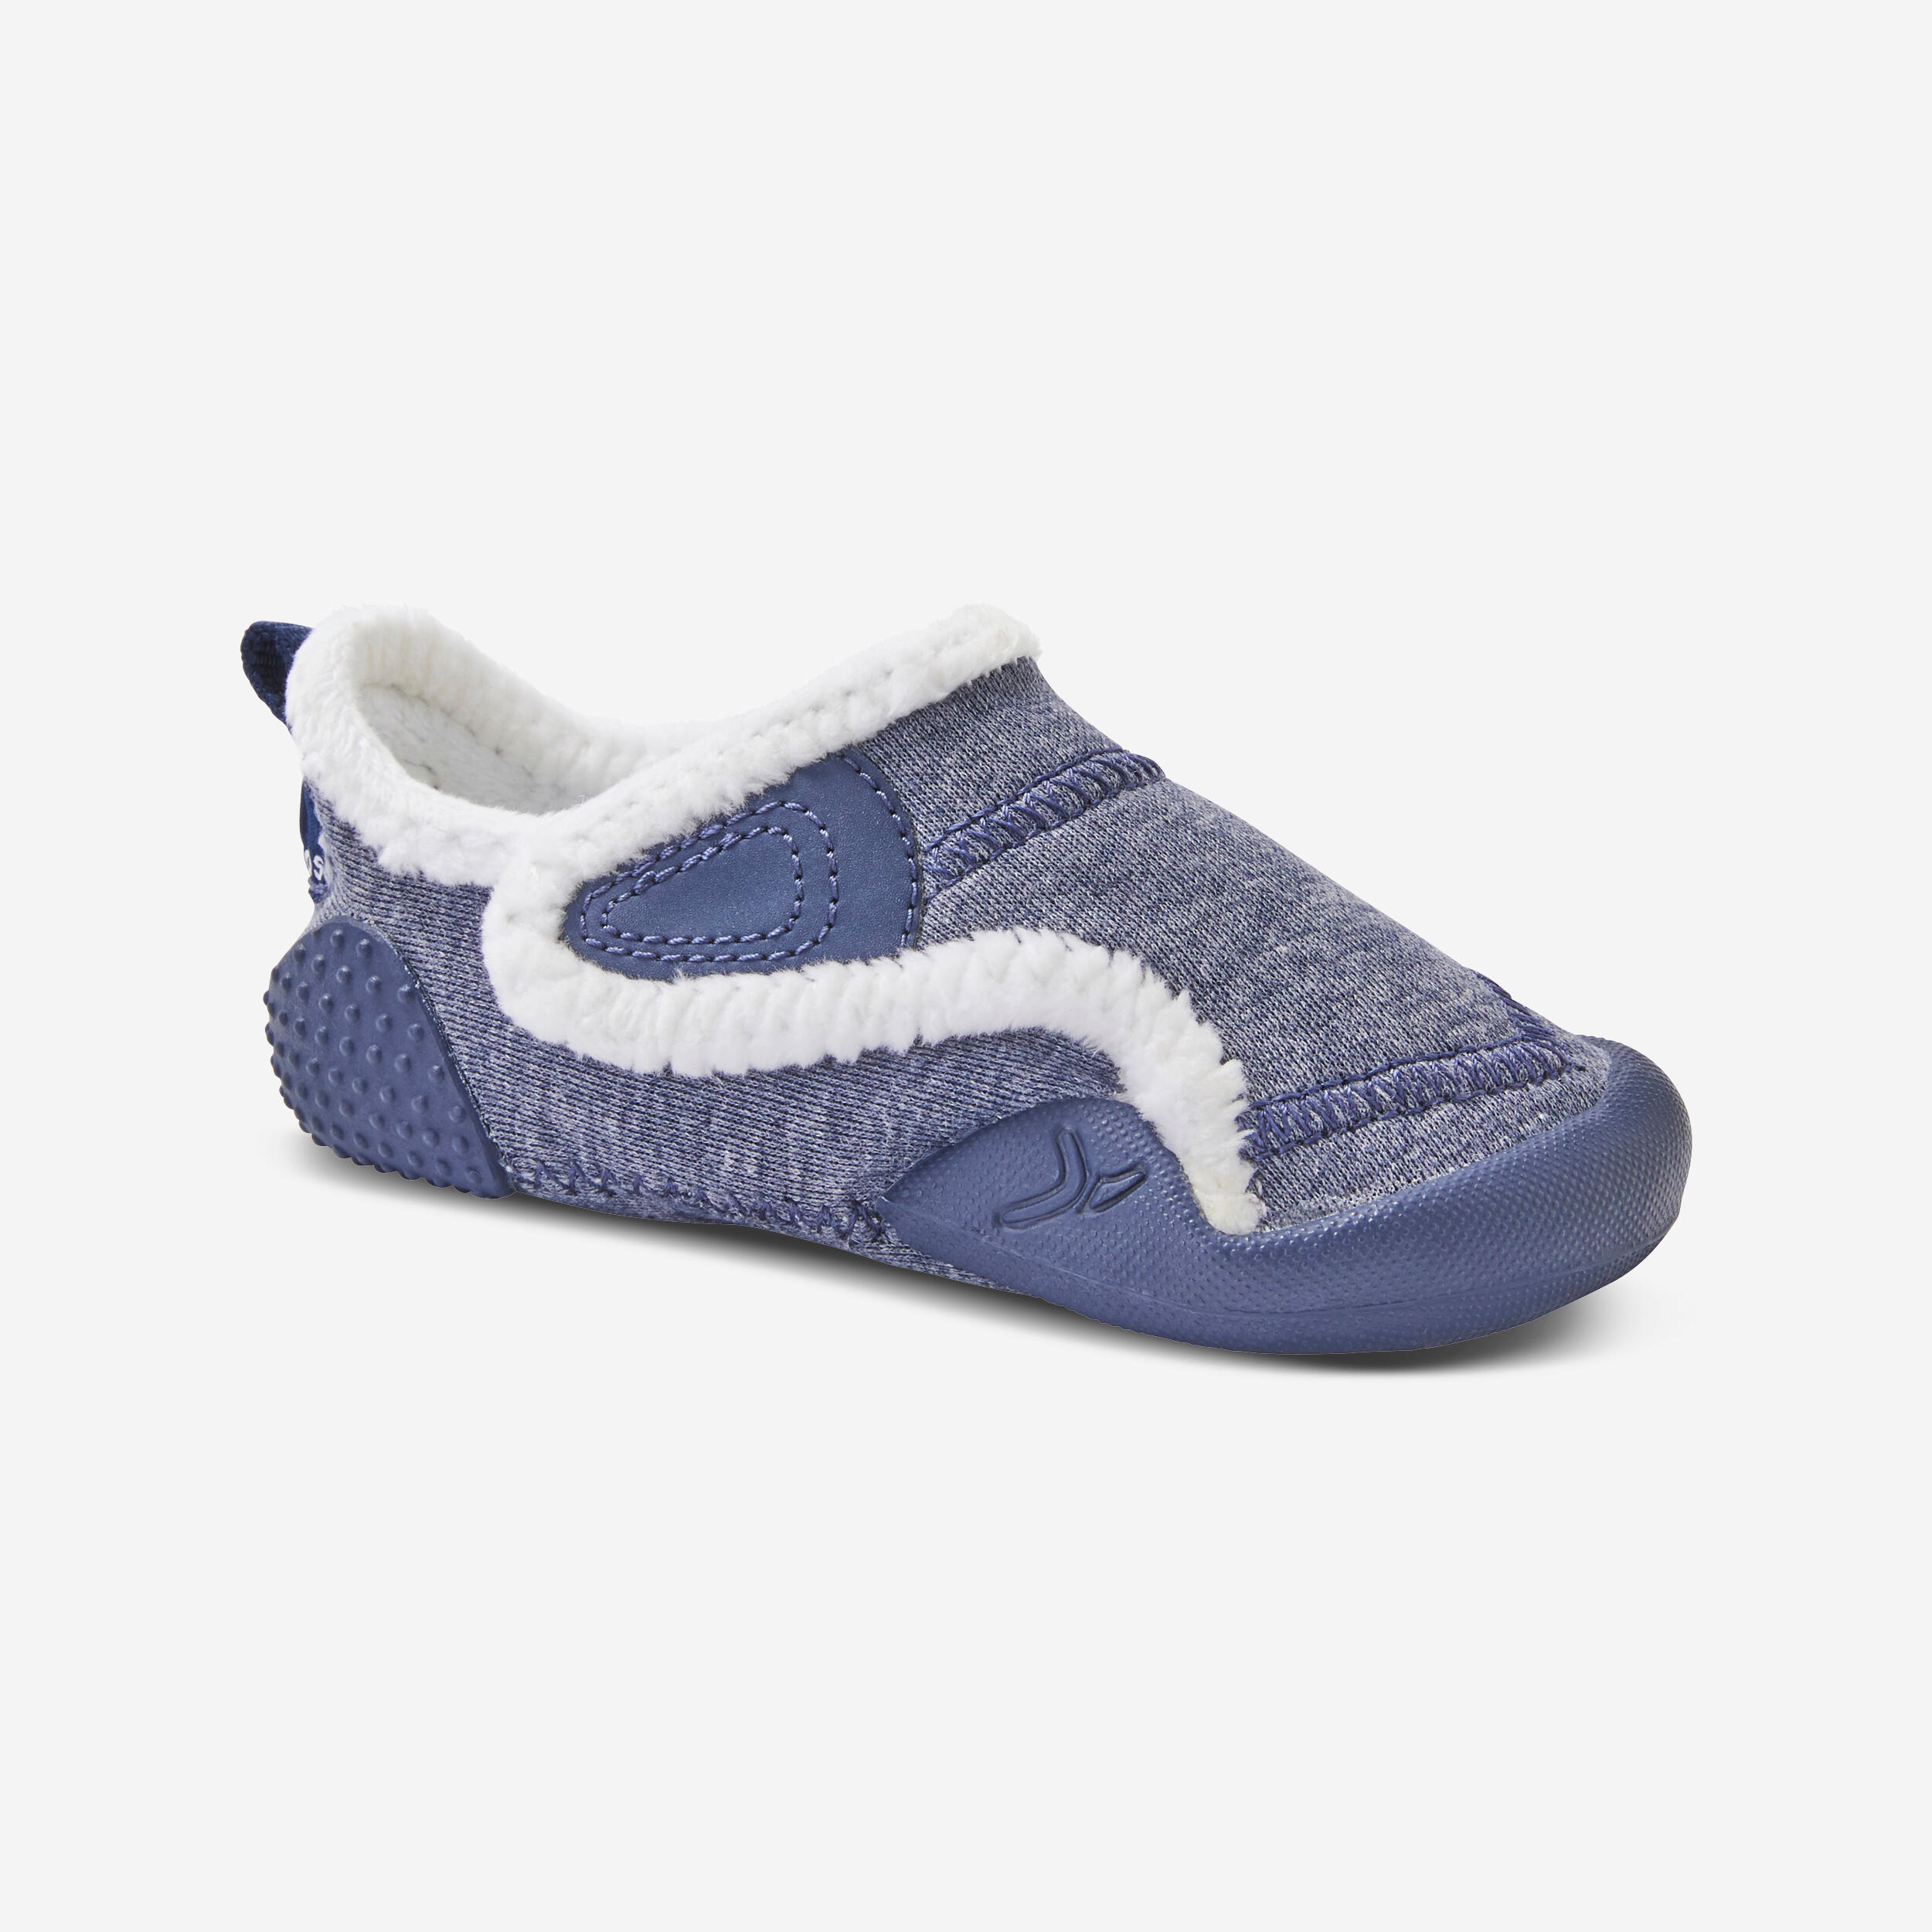 Kids' Soft and Non-Slip Bootee 1/7